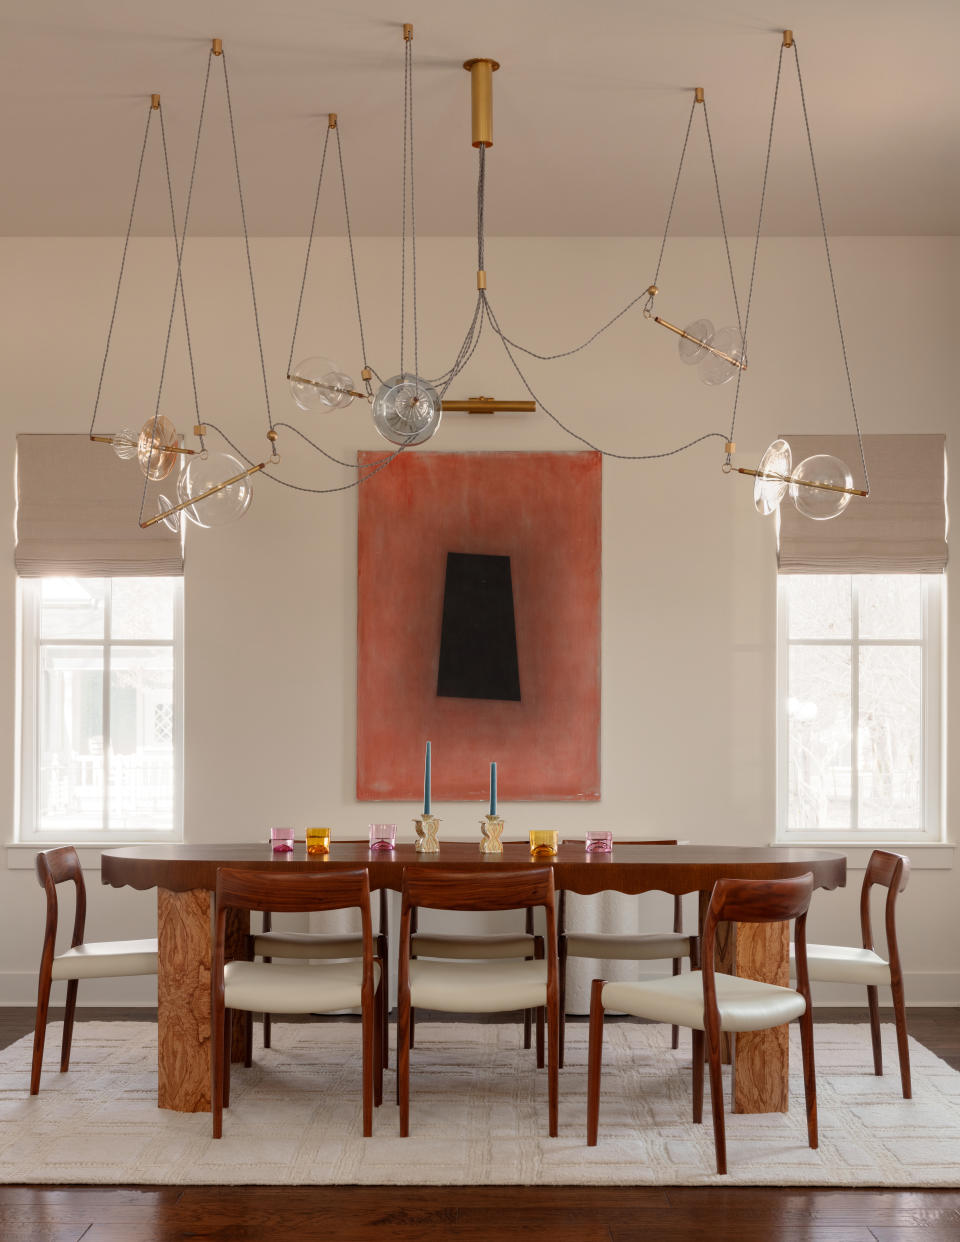 A bright dining room with wired hanging light fixtures and colorful glassware